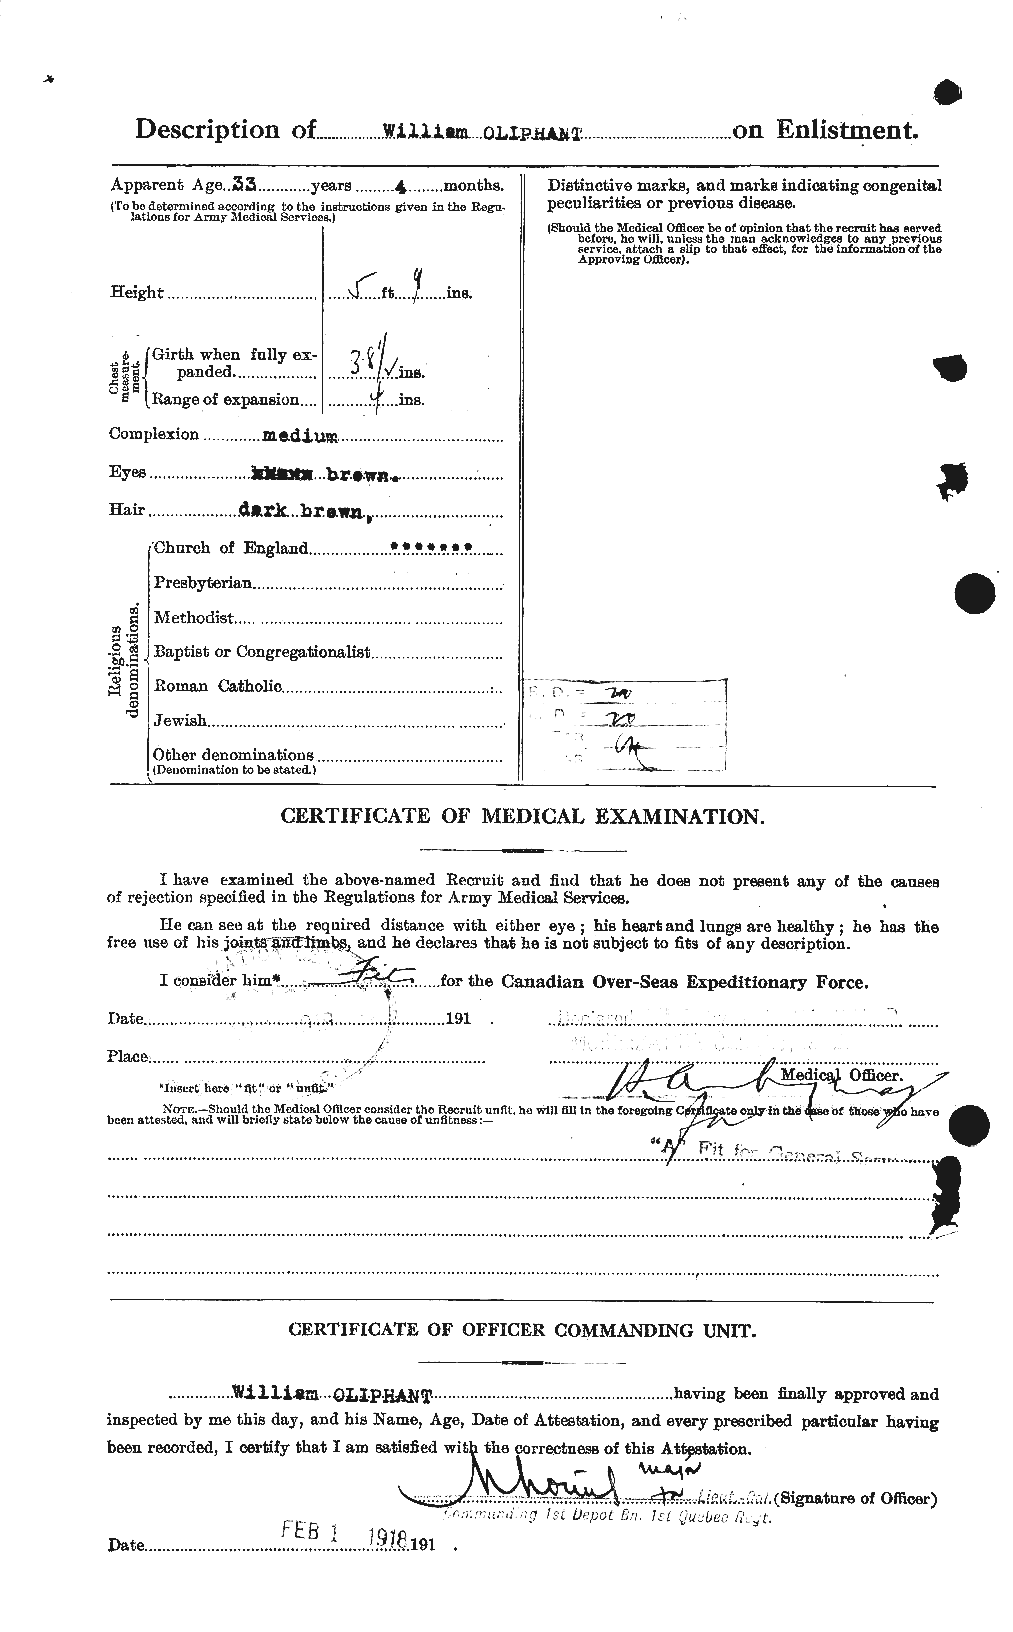 Personnel Records of the First World War - CEF 557068b